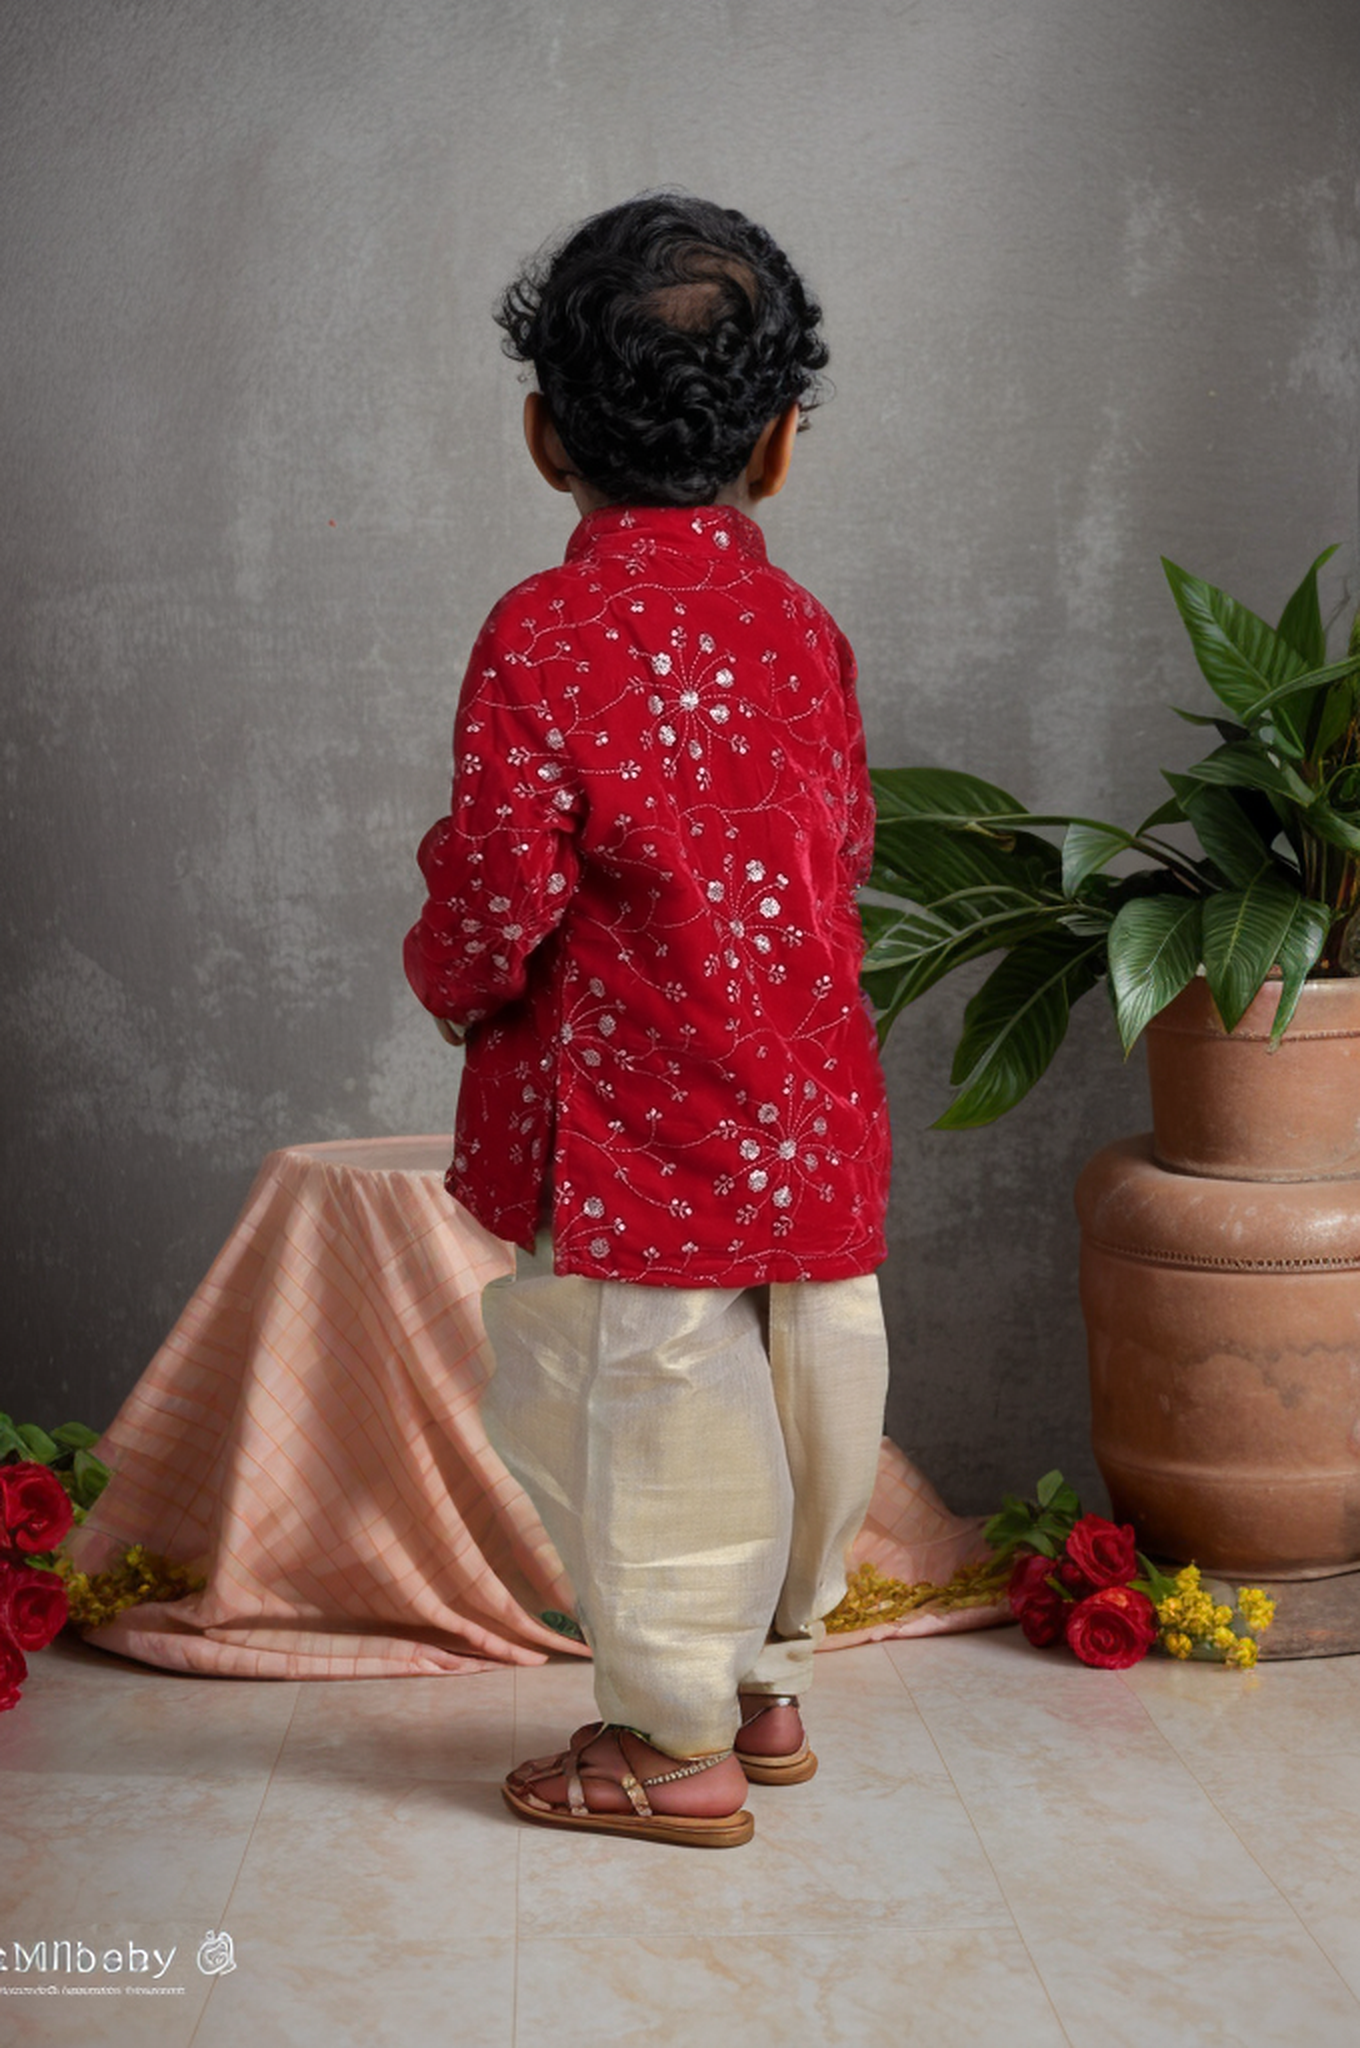 Royal Red and Gold Dhoti Ethnic Wear for Baby Boy